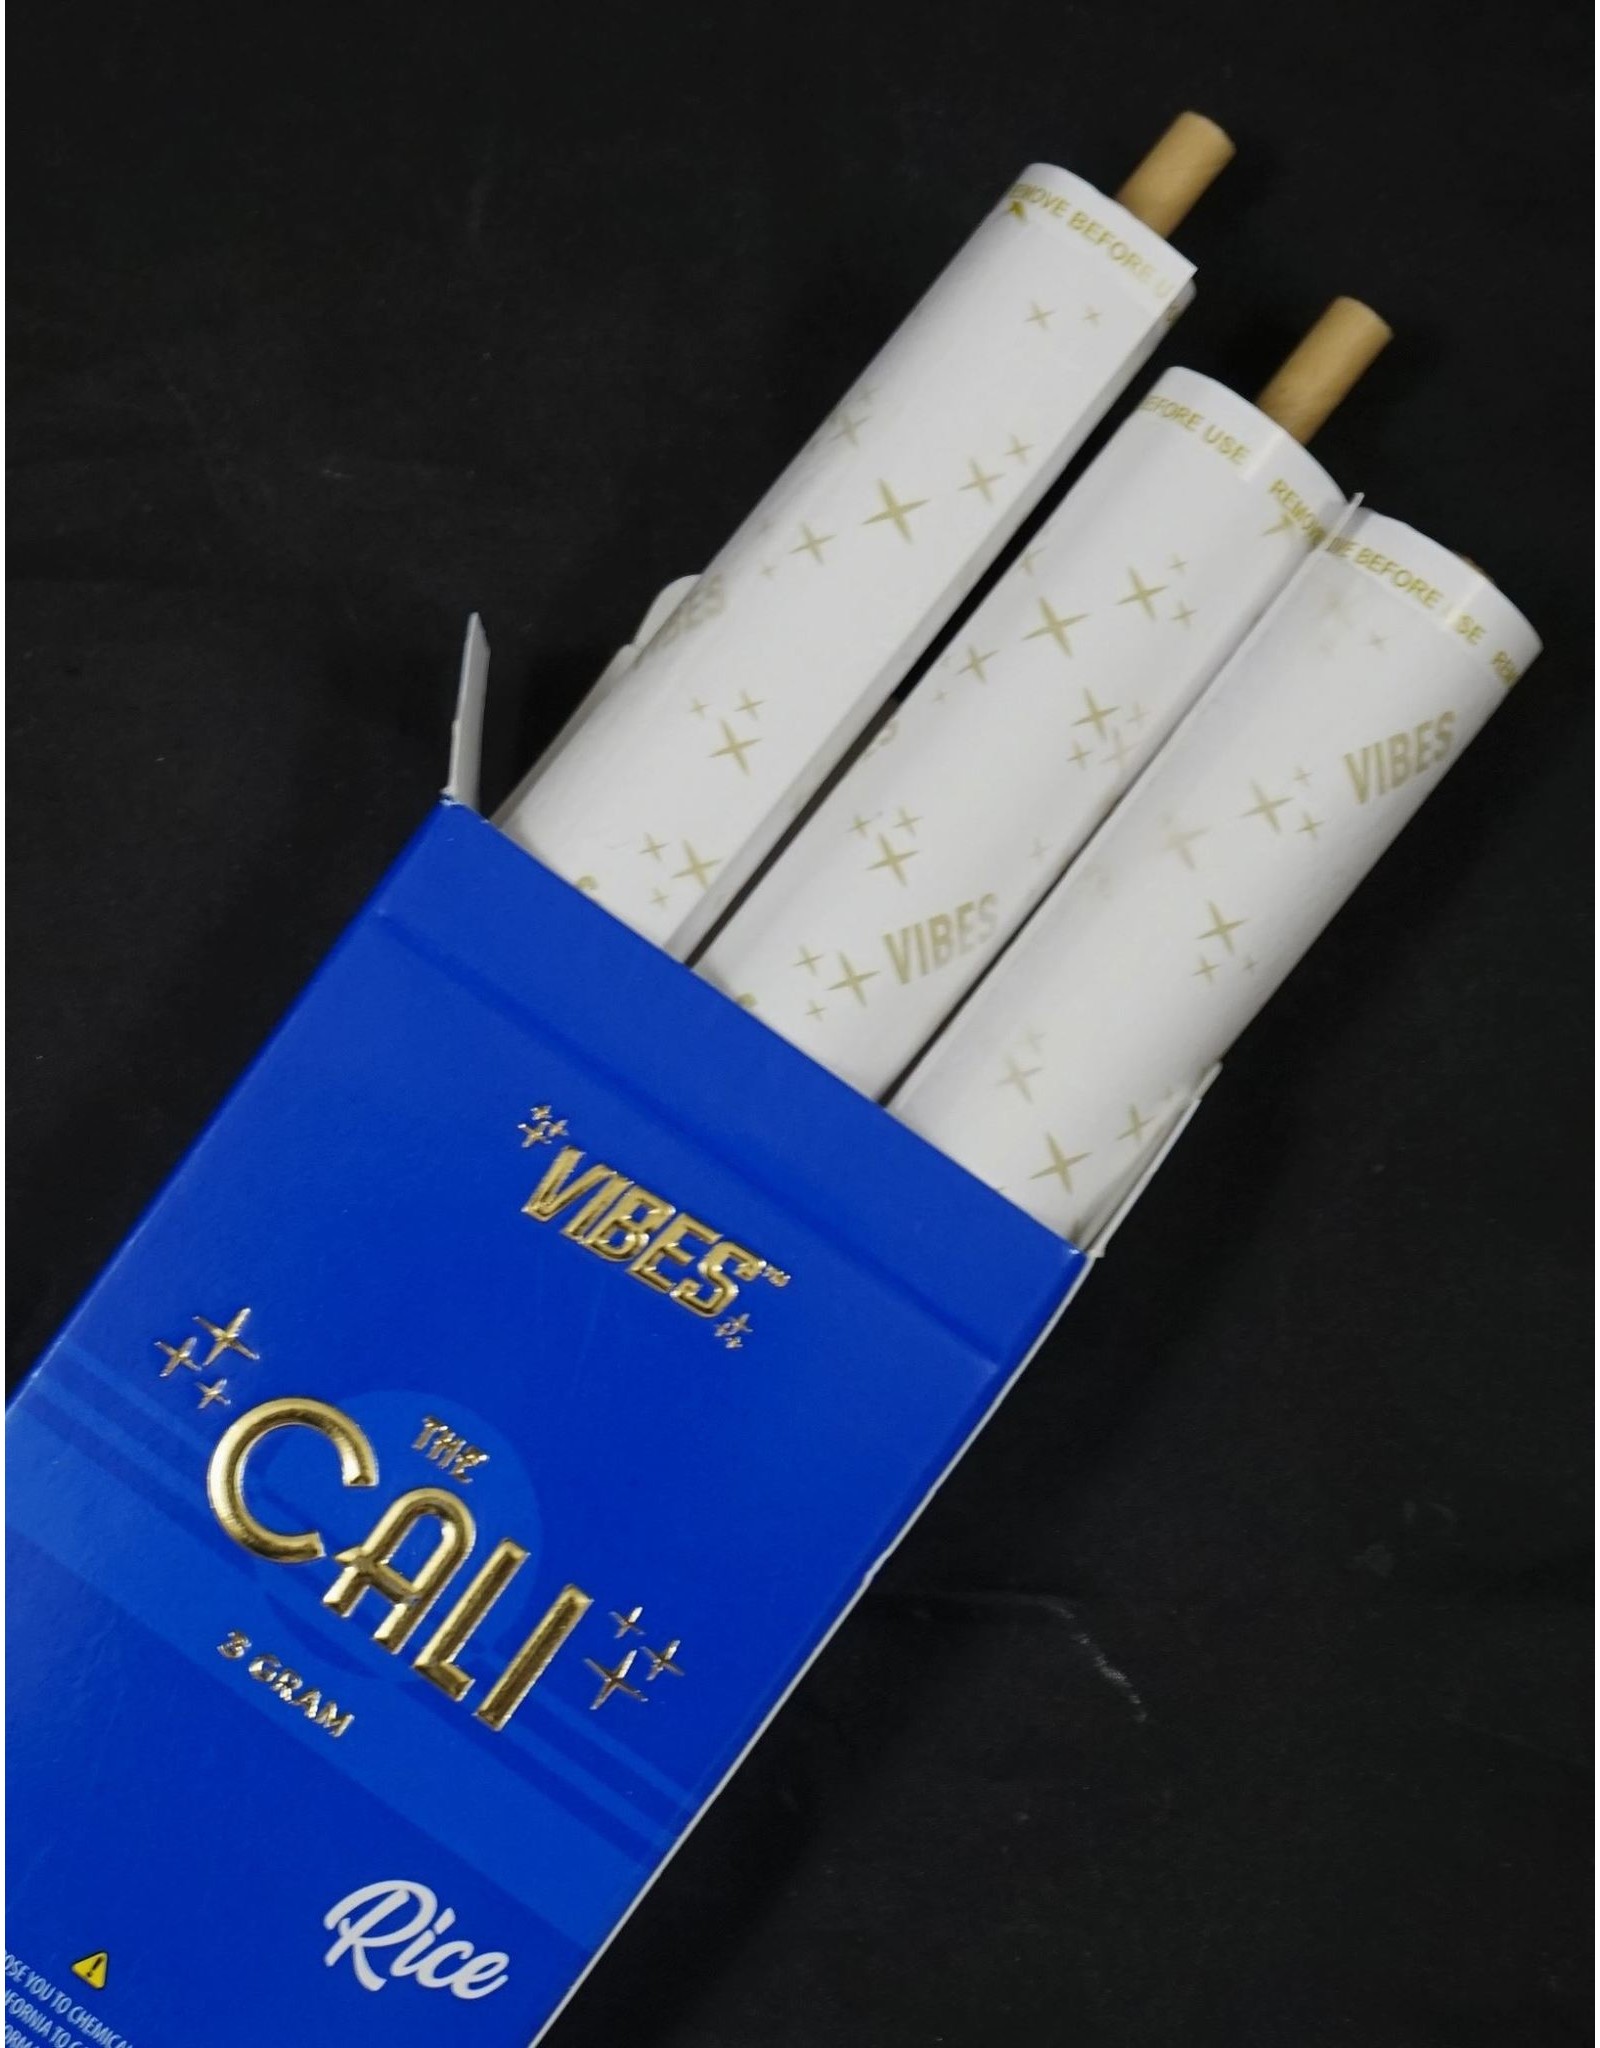 Vibes Papers Vibes Cali Cones 3g 3pk - Rice